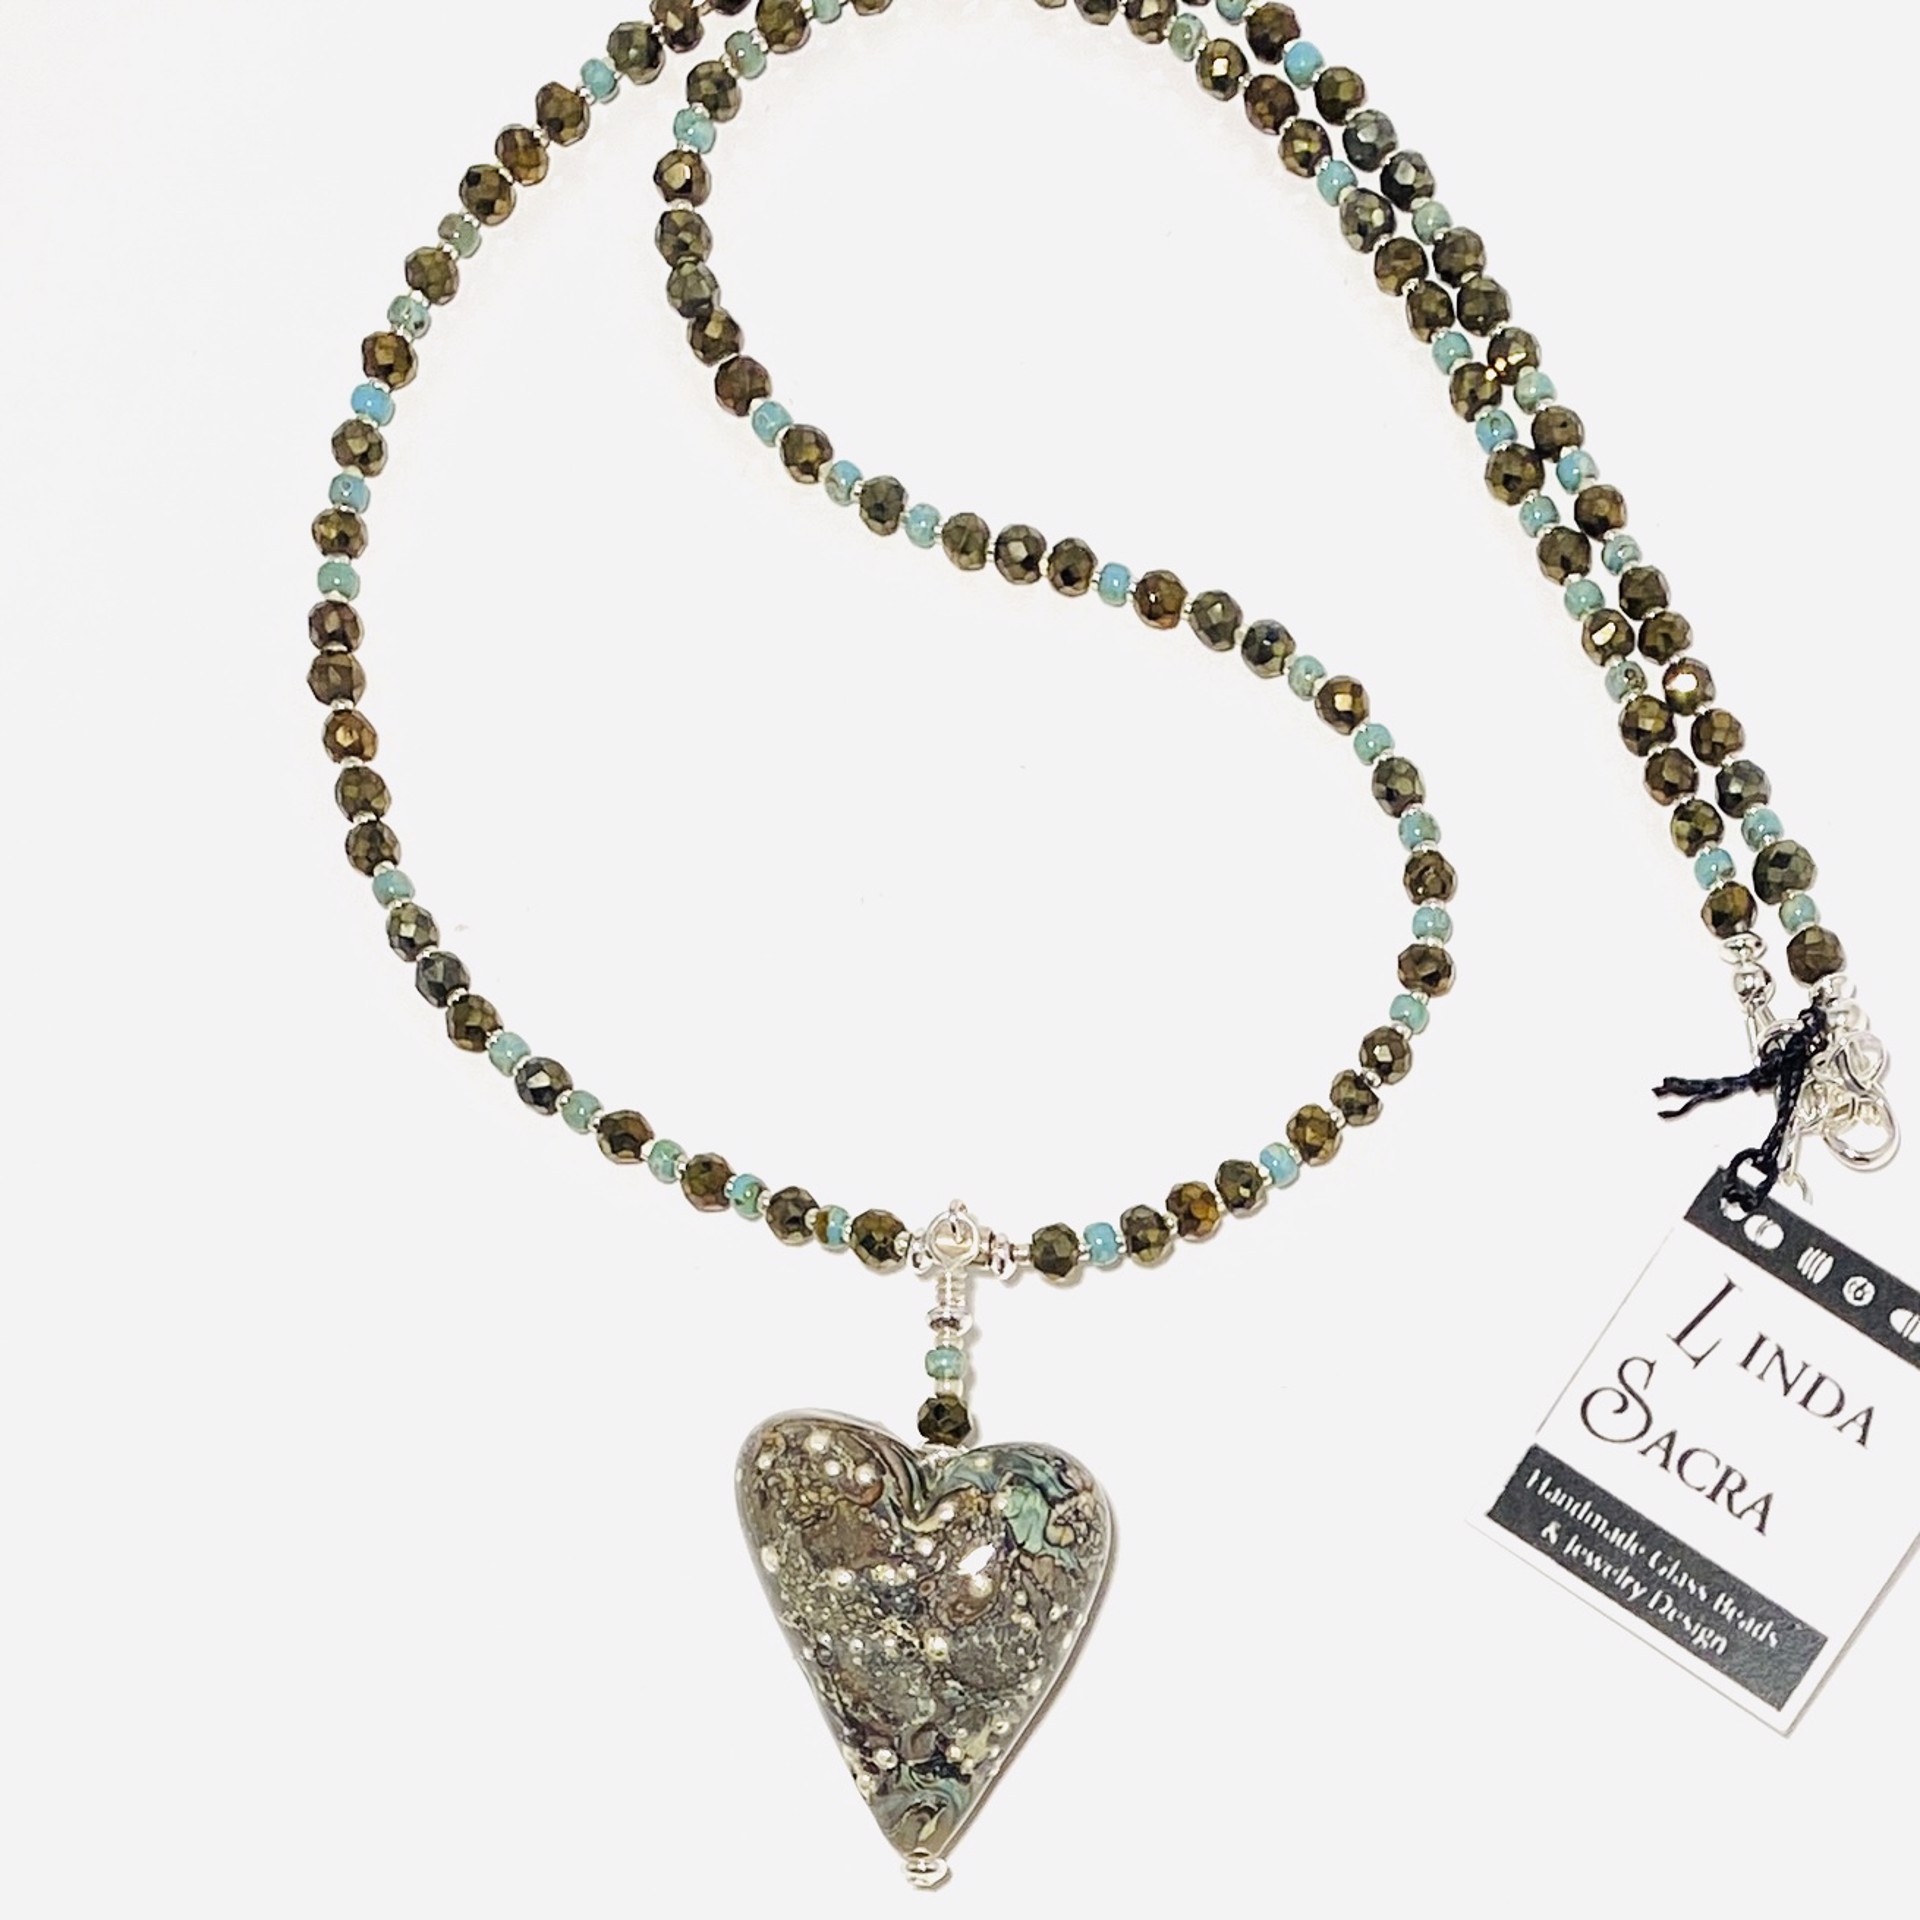 LS23-12A Silver Shard Turquoise Heart on  Semi  Precious Bead Necklace by Linda Sacra